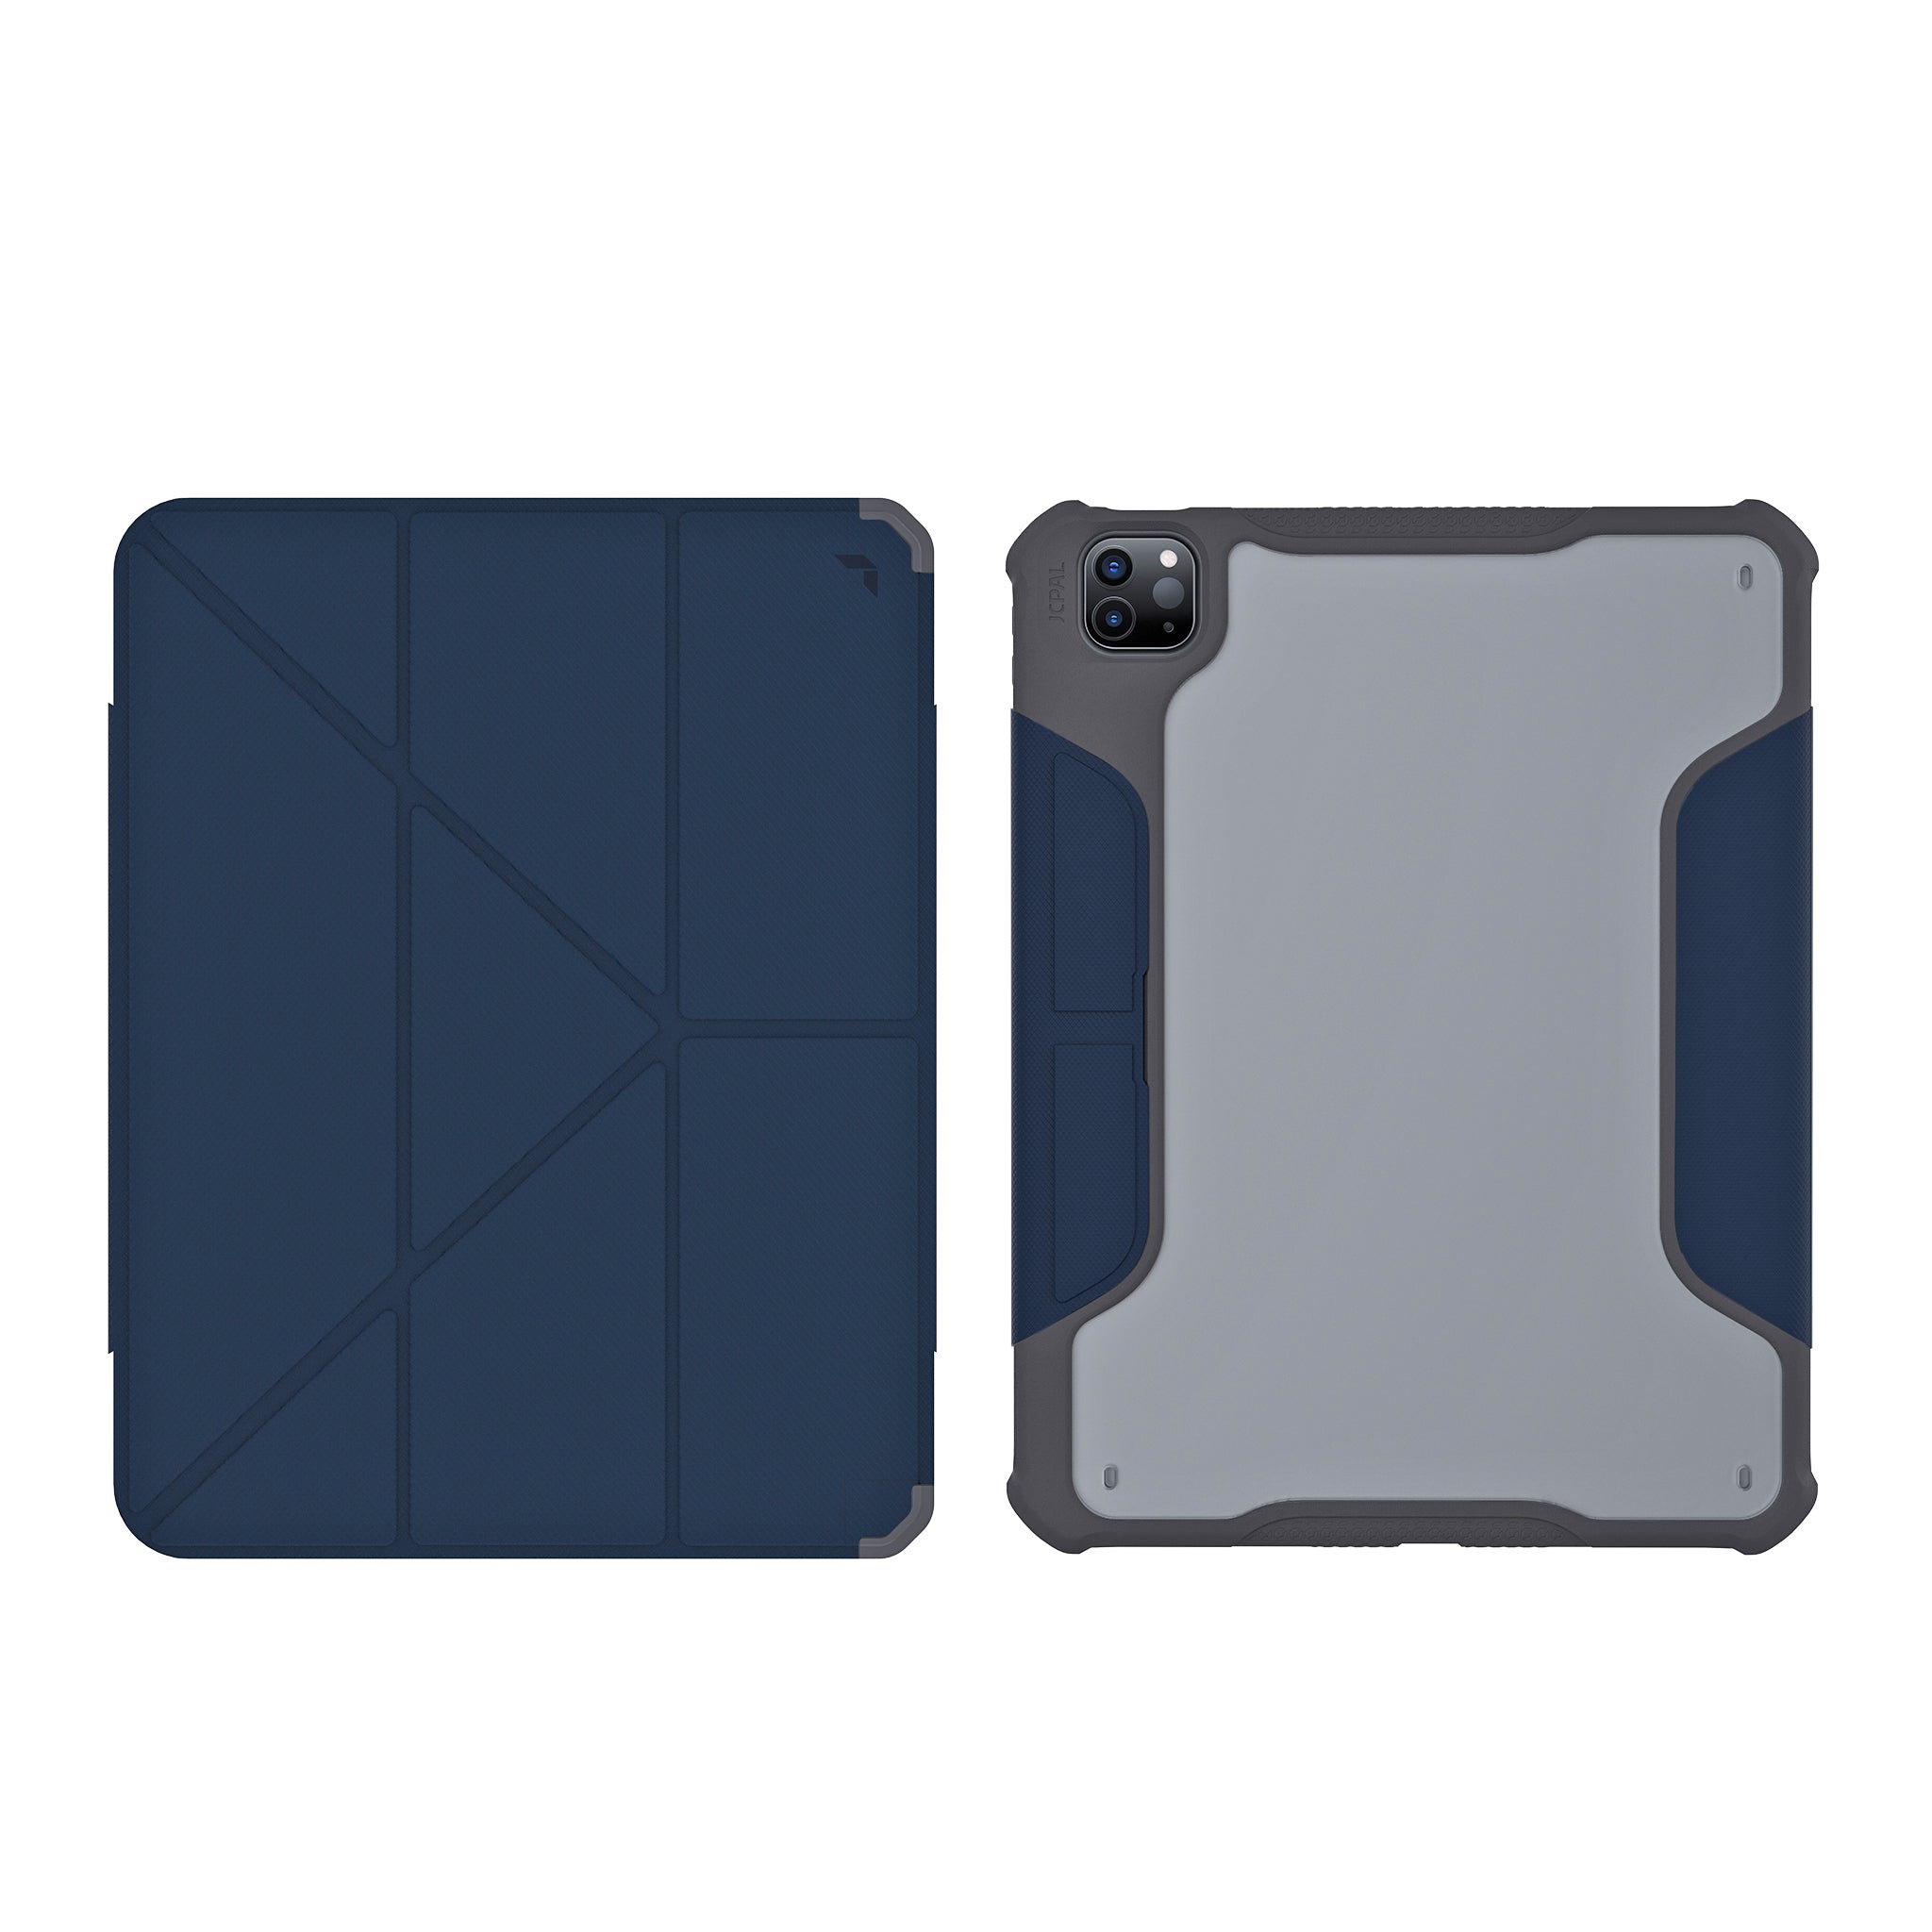 DuraPro XT   Ultra Protective Folio Case for iPad Pro 11" and Air 10.9"